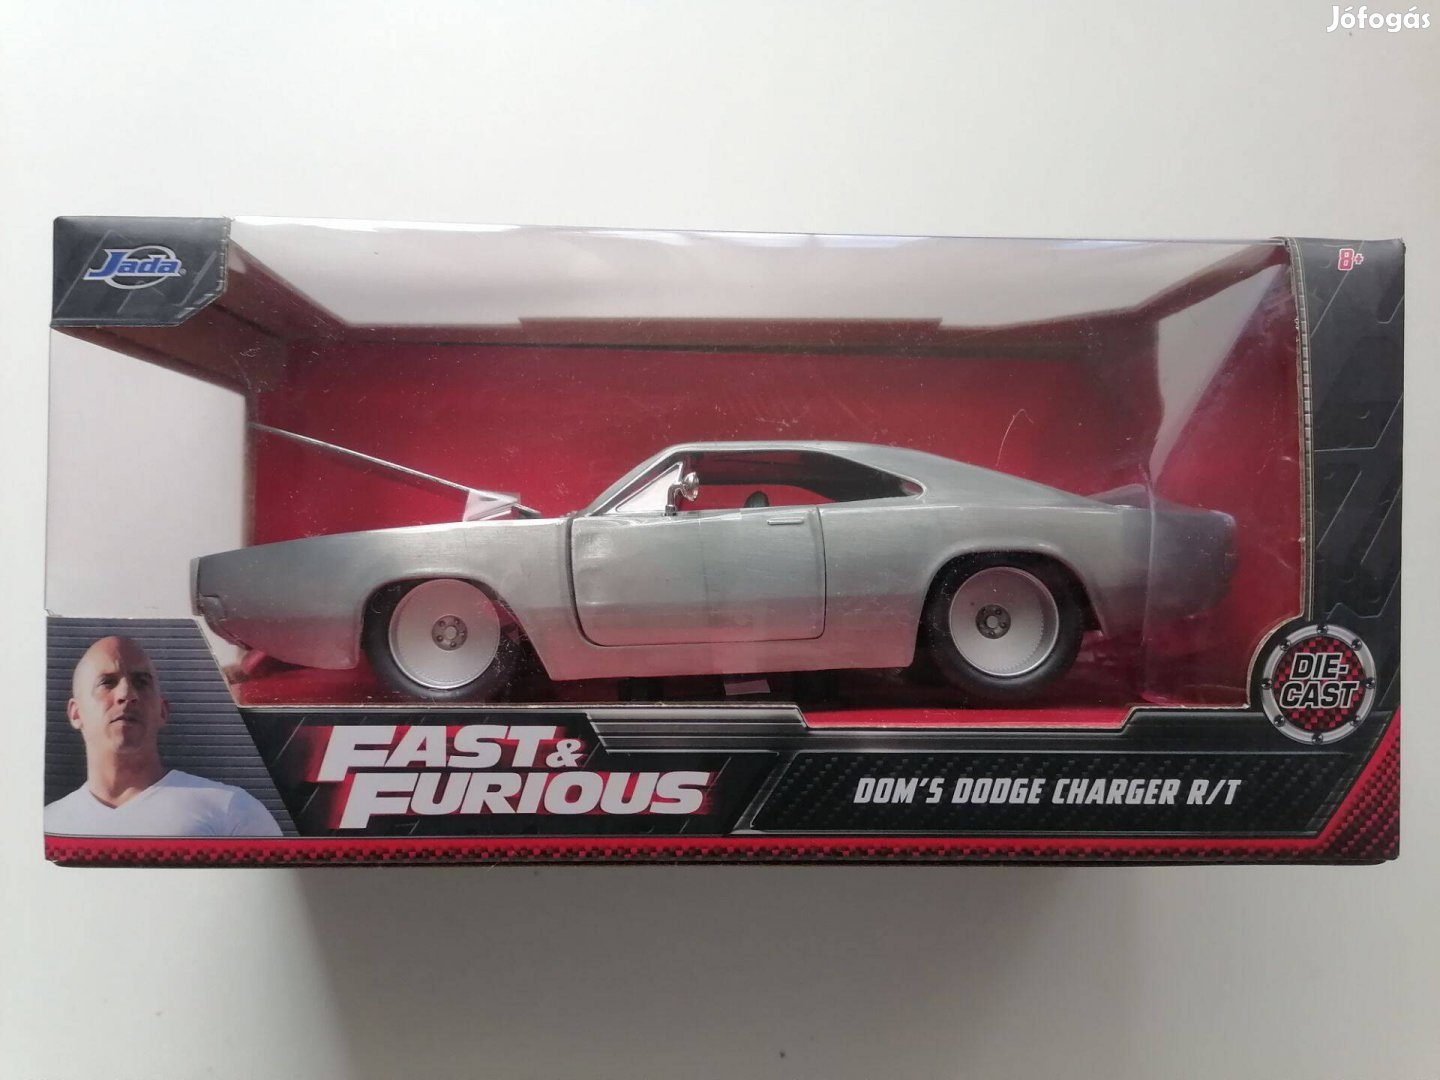 Fast & Furious Dom's Dodge Charger R/T 1:24 Autó Modell